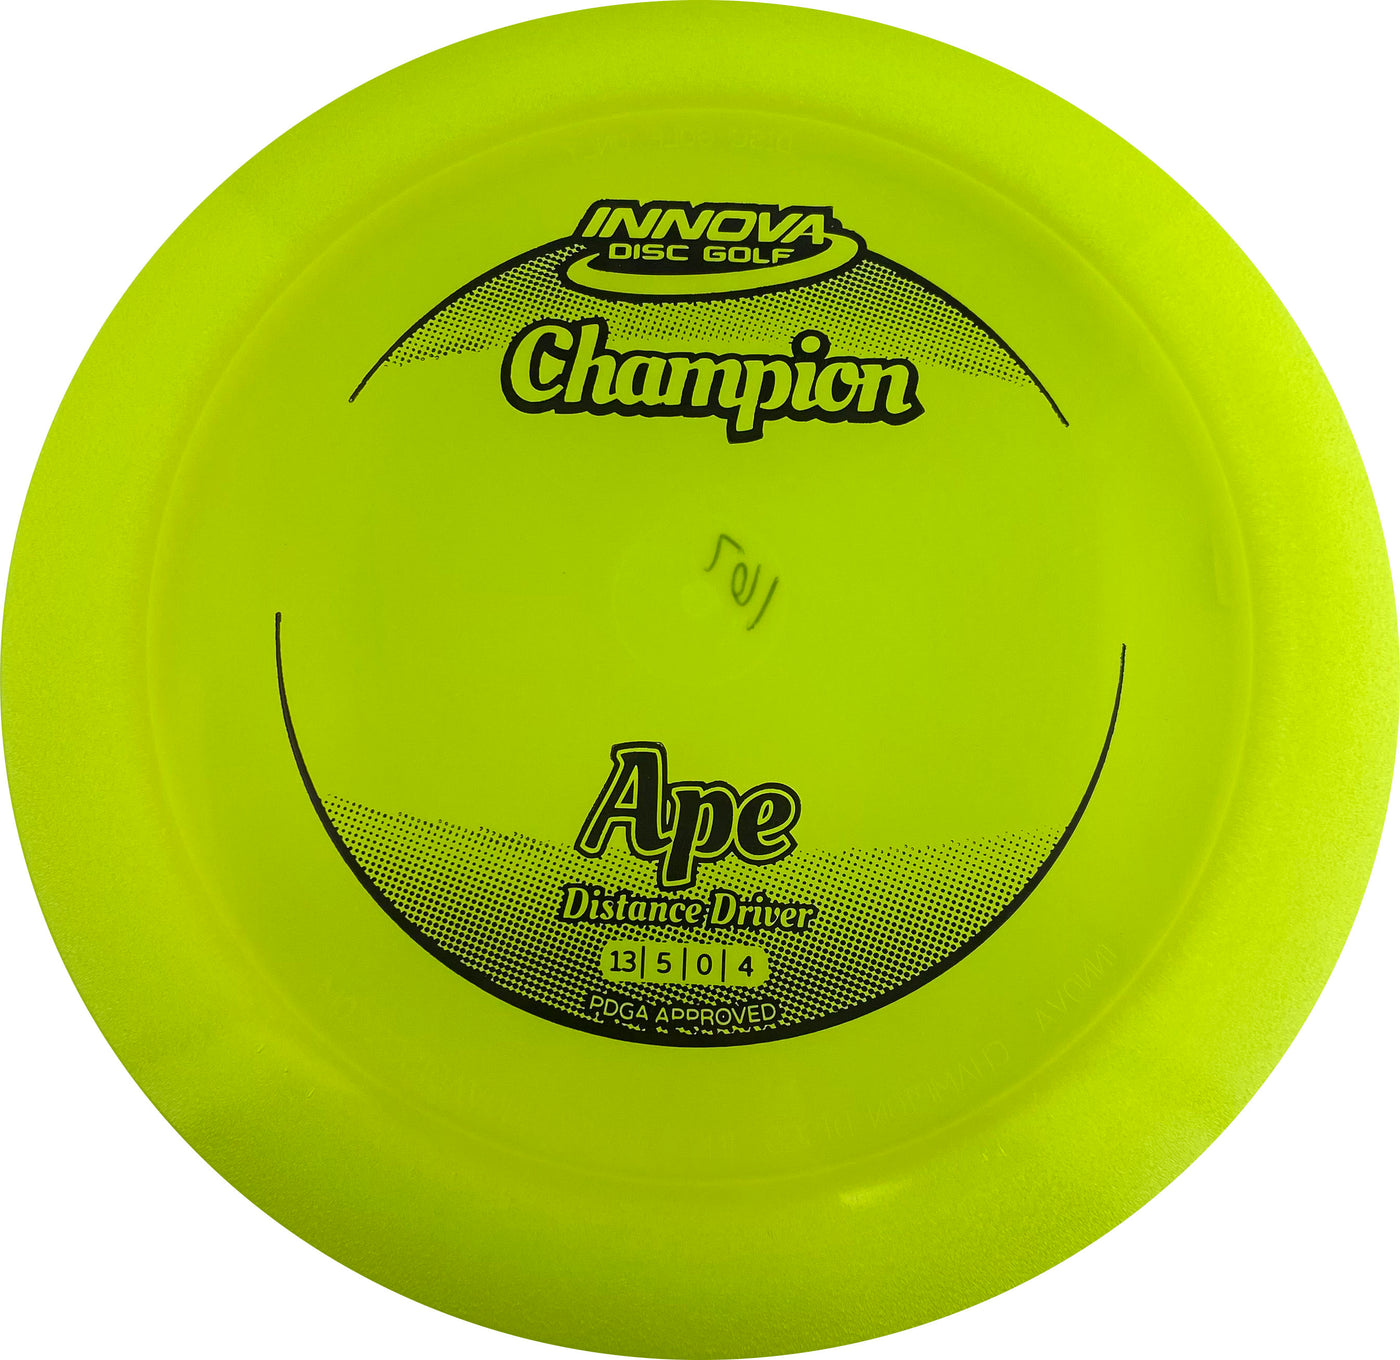 Innova Champion Ape Distance Driver with Circle Fade Stock Stamp - Speed 13